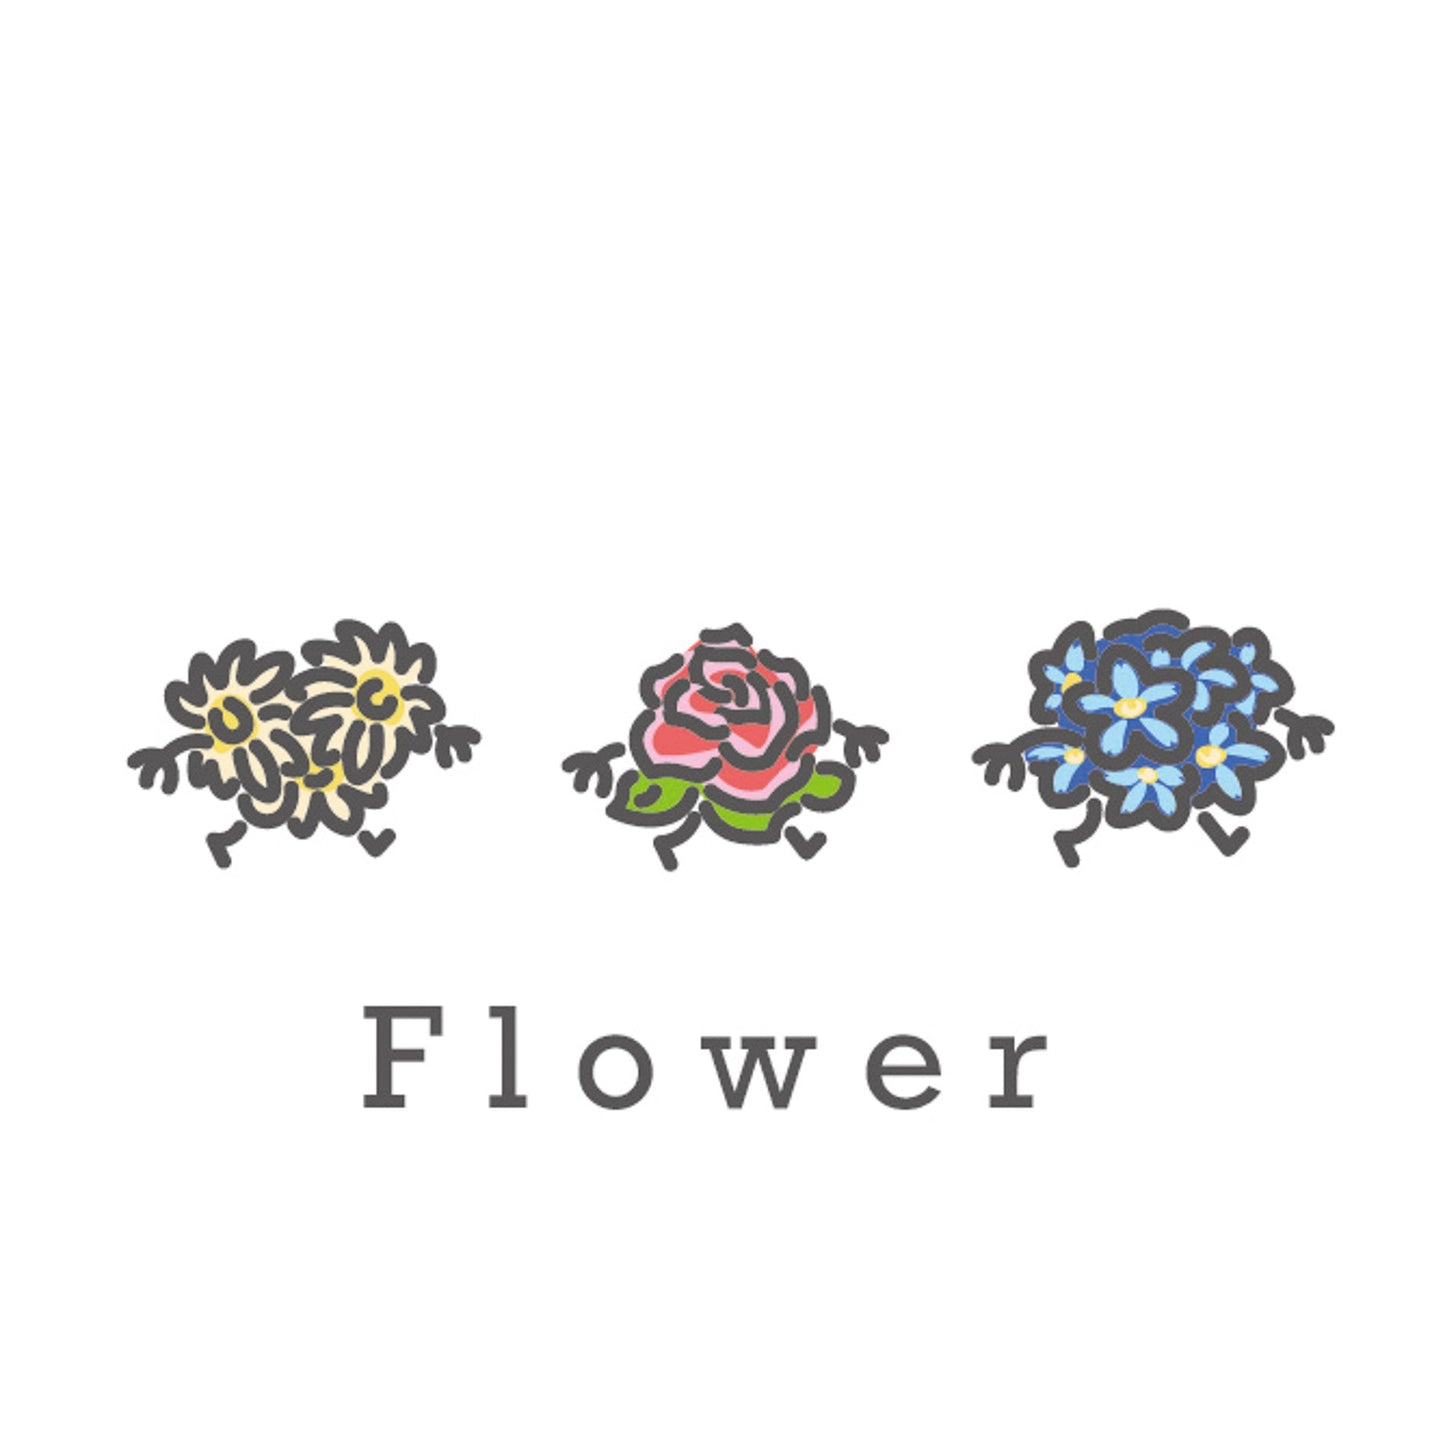 Embroidery Graphic Tee - Flower